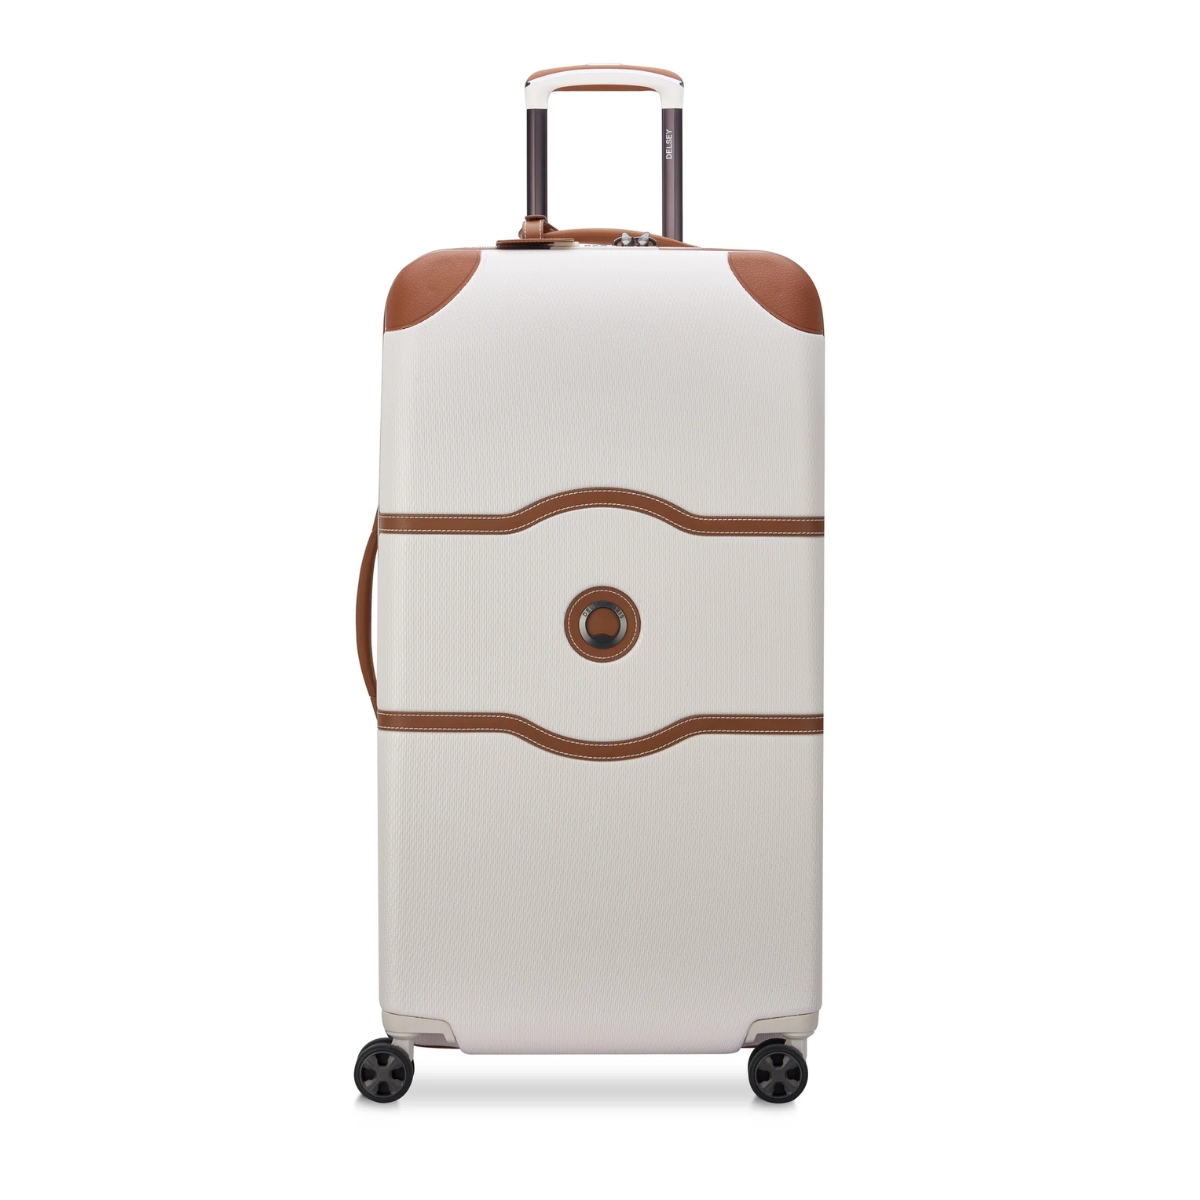 This Super Chic Delsey Paris Suitcase Is Up to 33 Off on Amazon Right Now